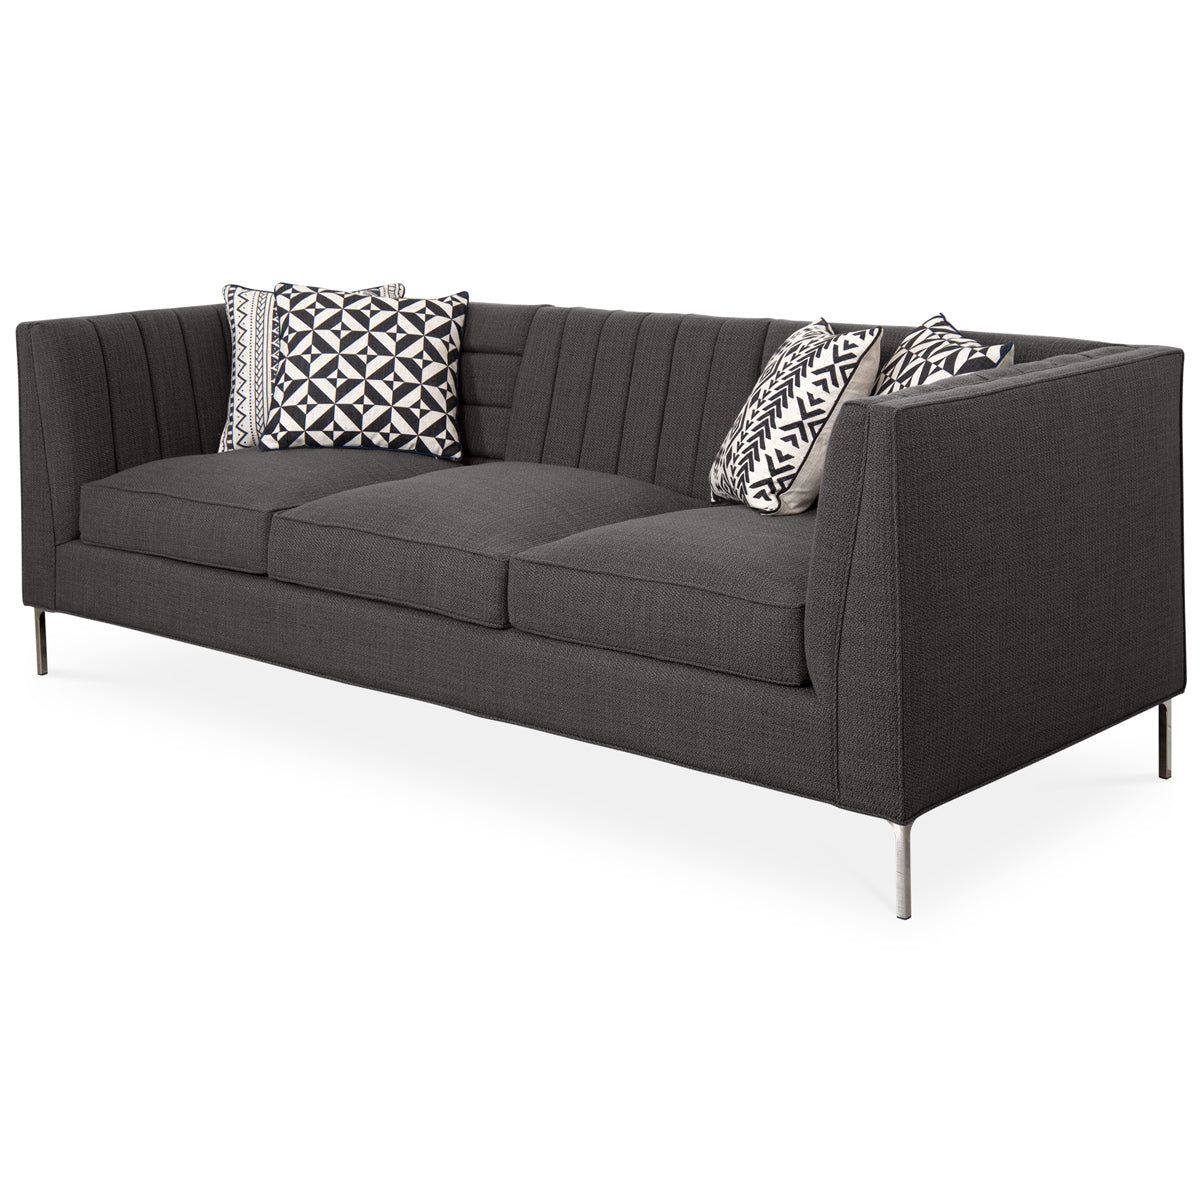 Capri Sofa In Charcoal Linen – Modshop With Light Charcoal Linen Sofas (View 7 of 20)